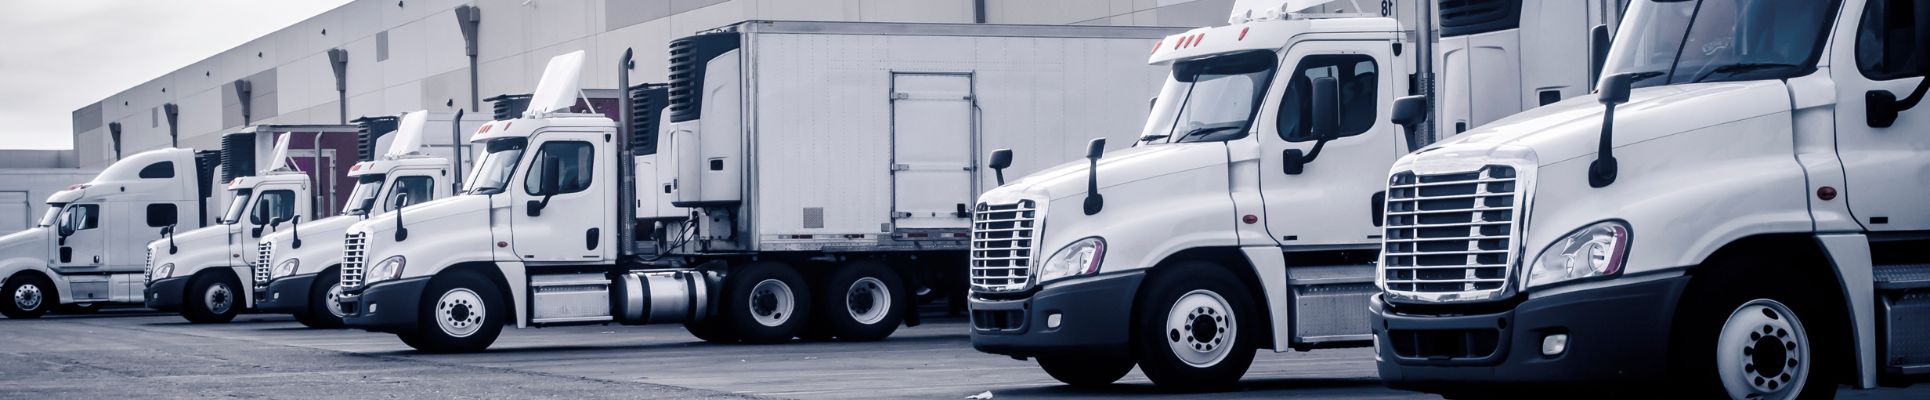 Tips for Improving Sustainability in Your Trucking Business